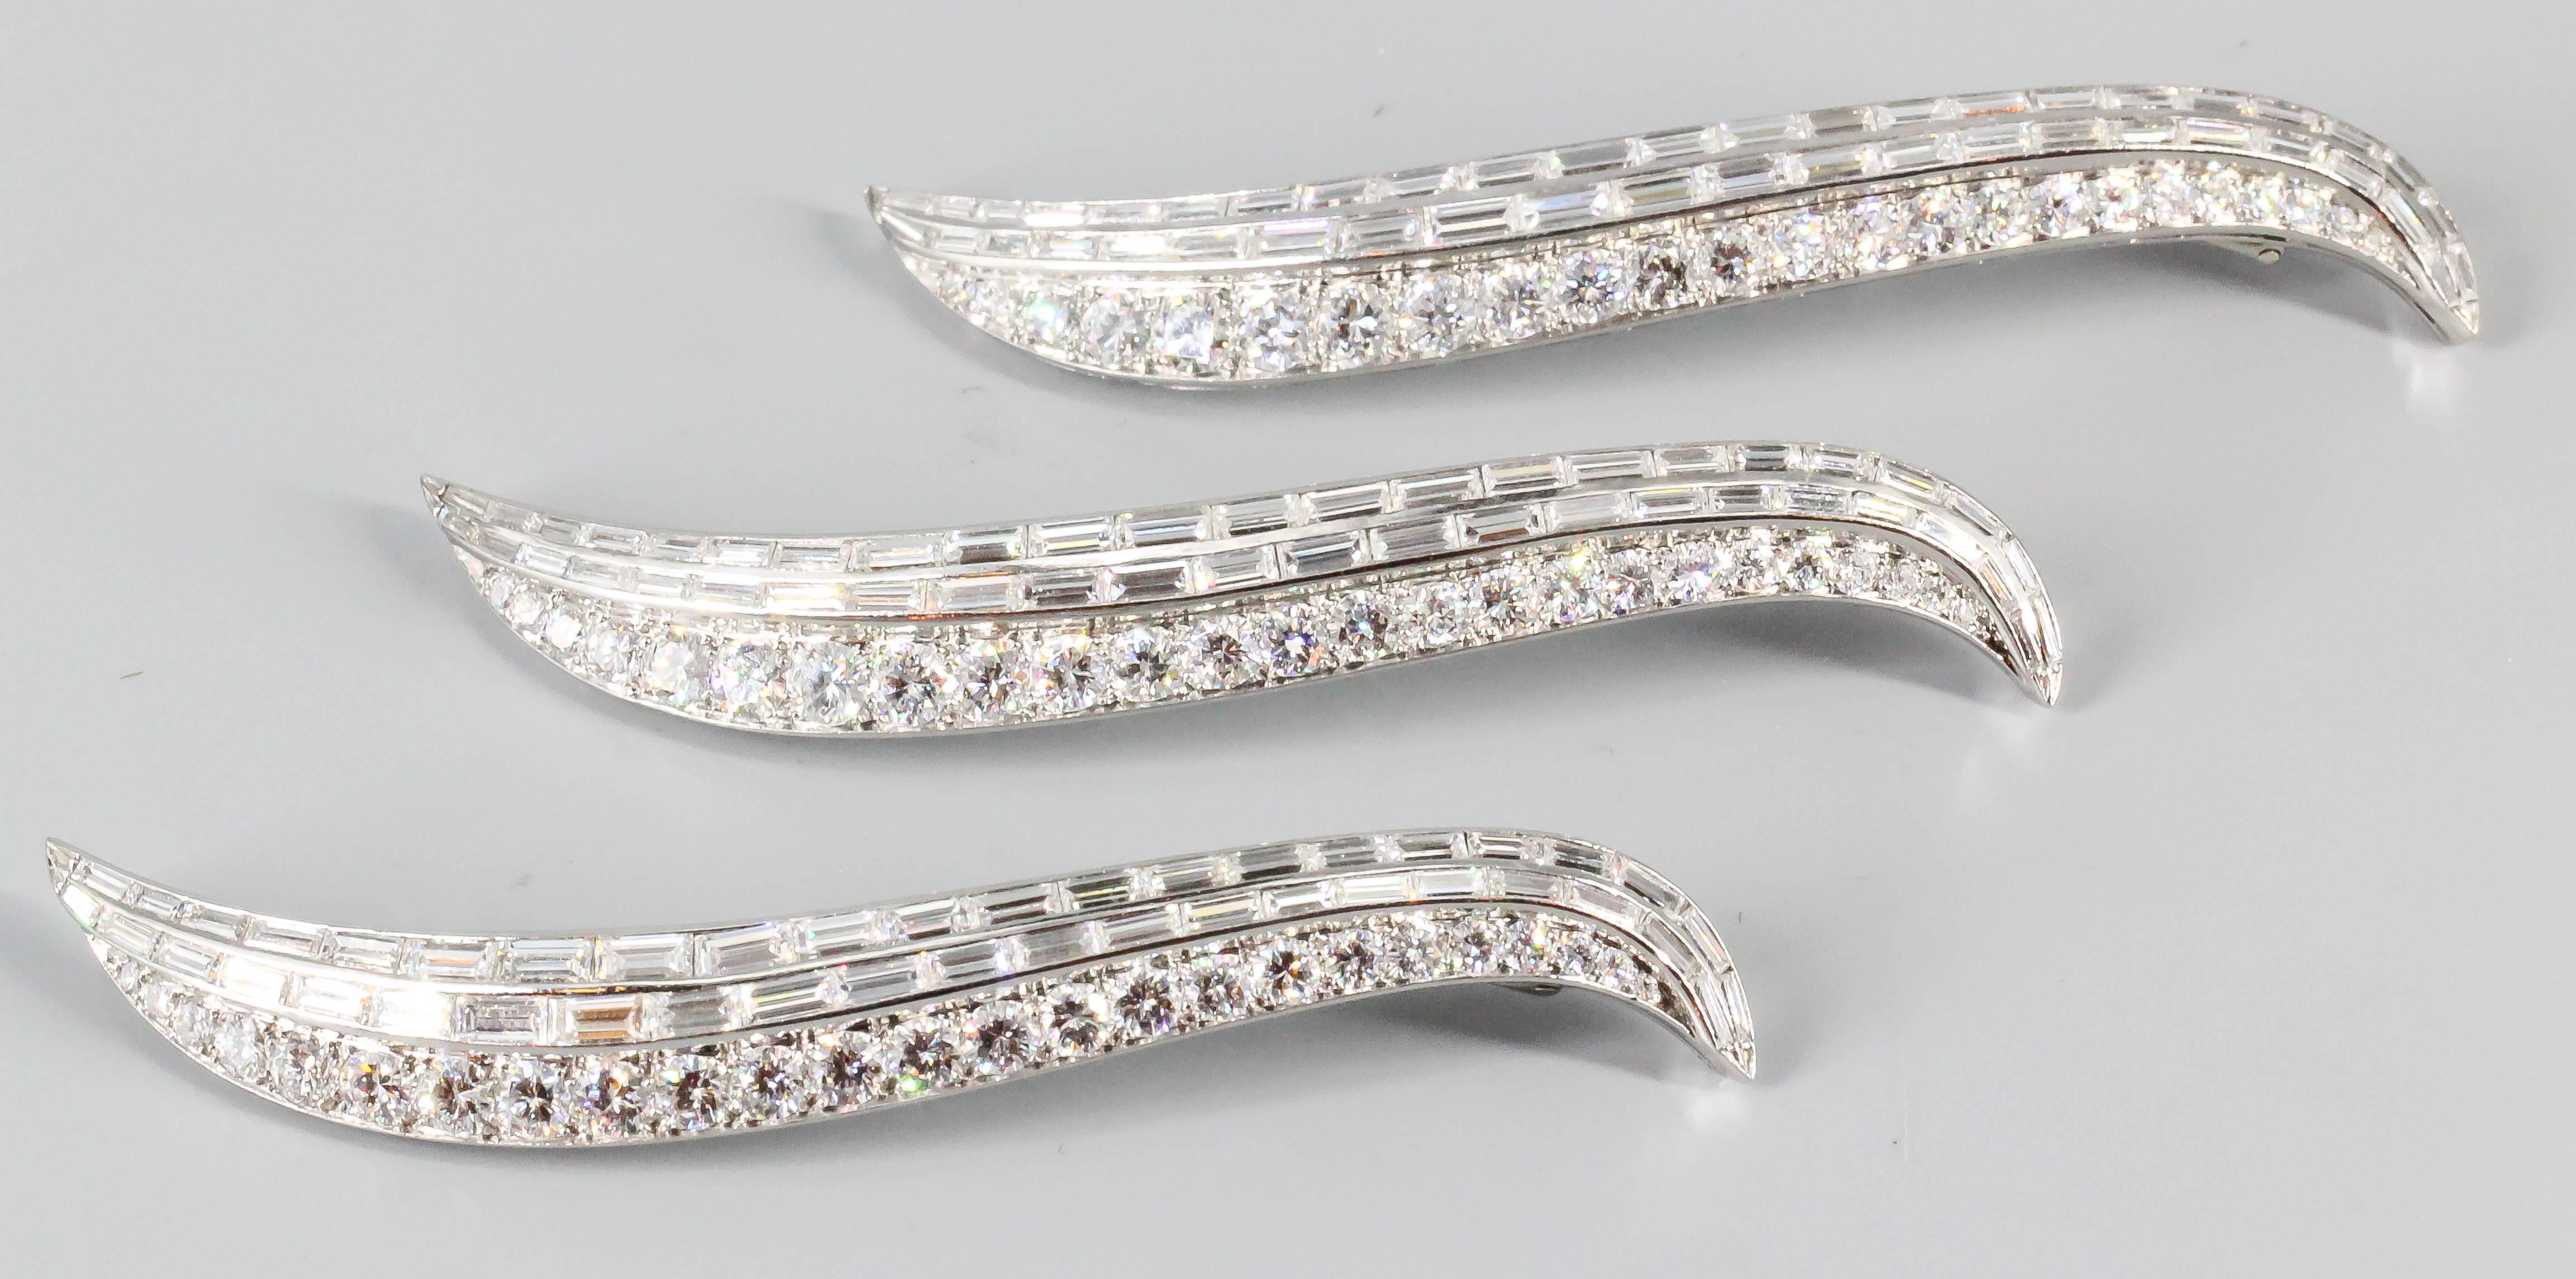 Chic diamond, platinum and 18K white gold brooches (4) from the Art Deco Period, of French origin. They feature very high grade round and baguette cut diamonds, for a combined carat weight of approx. 45-50 carats over a platinum setting and a white